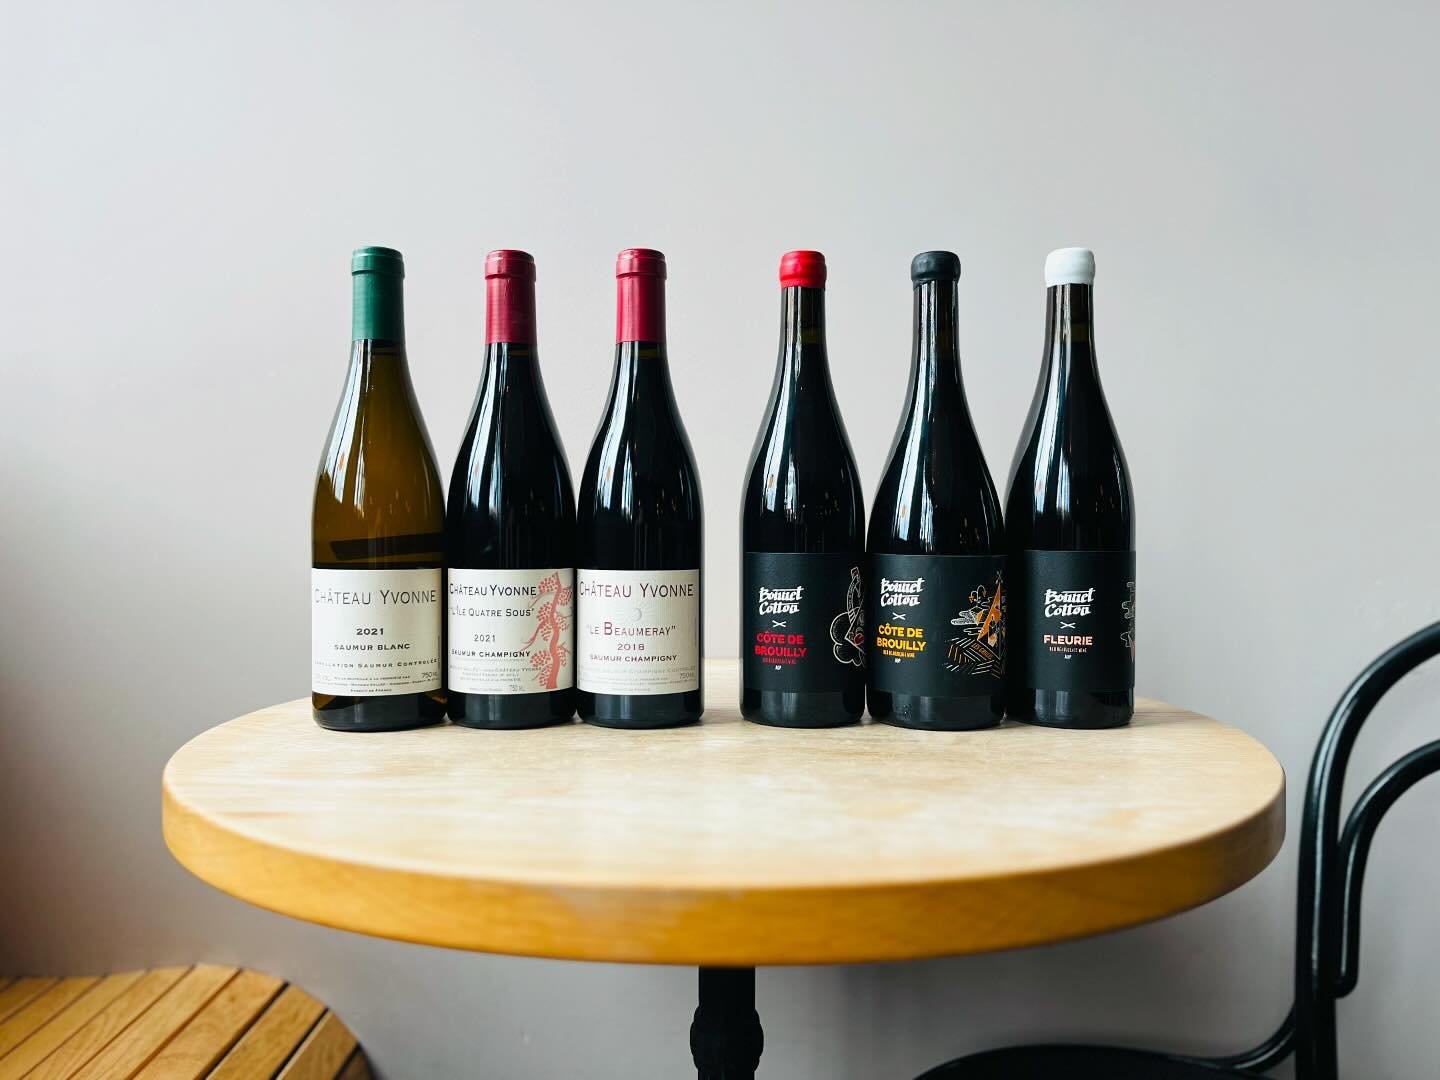 LOIRE X BEAUJOLAIS
It&rsquo;s no secret that our passion for wine began with our first encounters with bottles from the Loire and Beaujolais. At this week&rsquo;s AFTER HOURS we&rsquo;re tasting and celebrating the wines of two producers whose work c